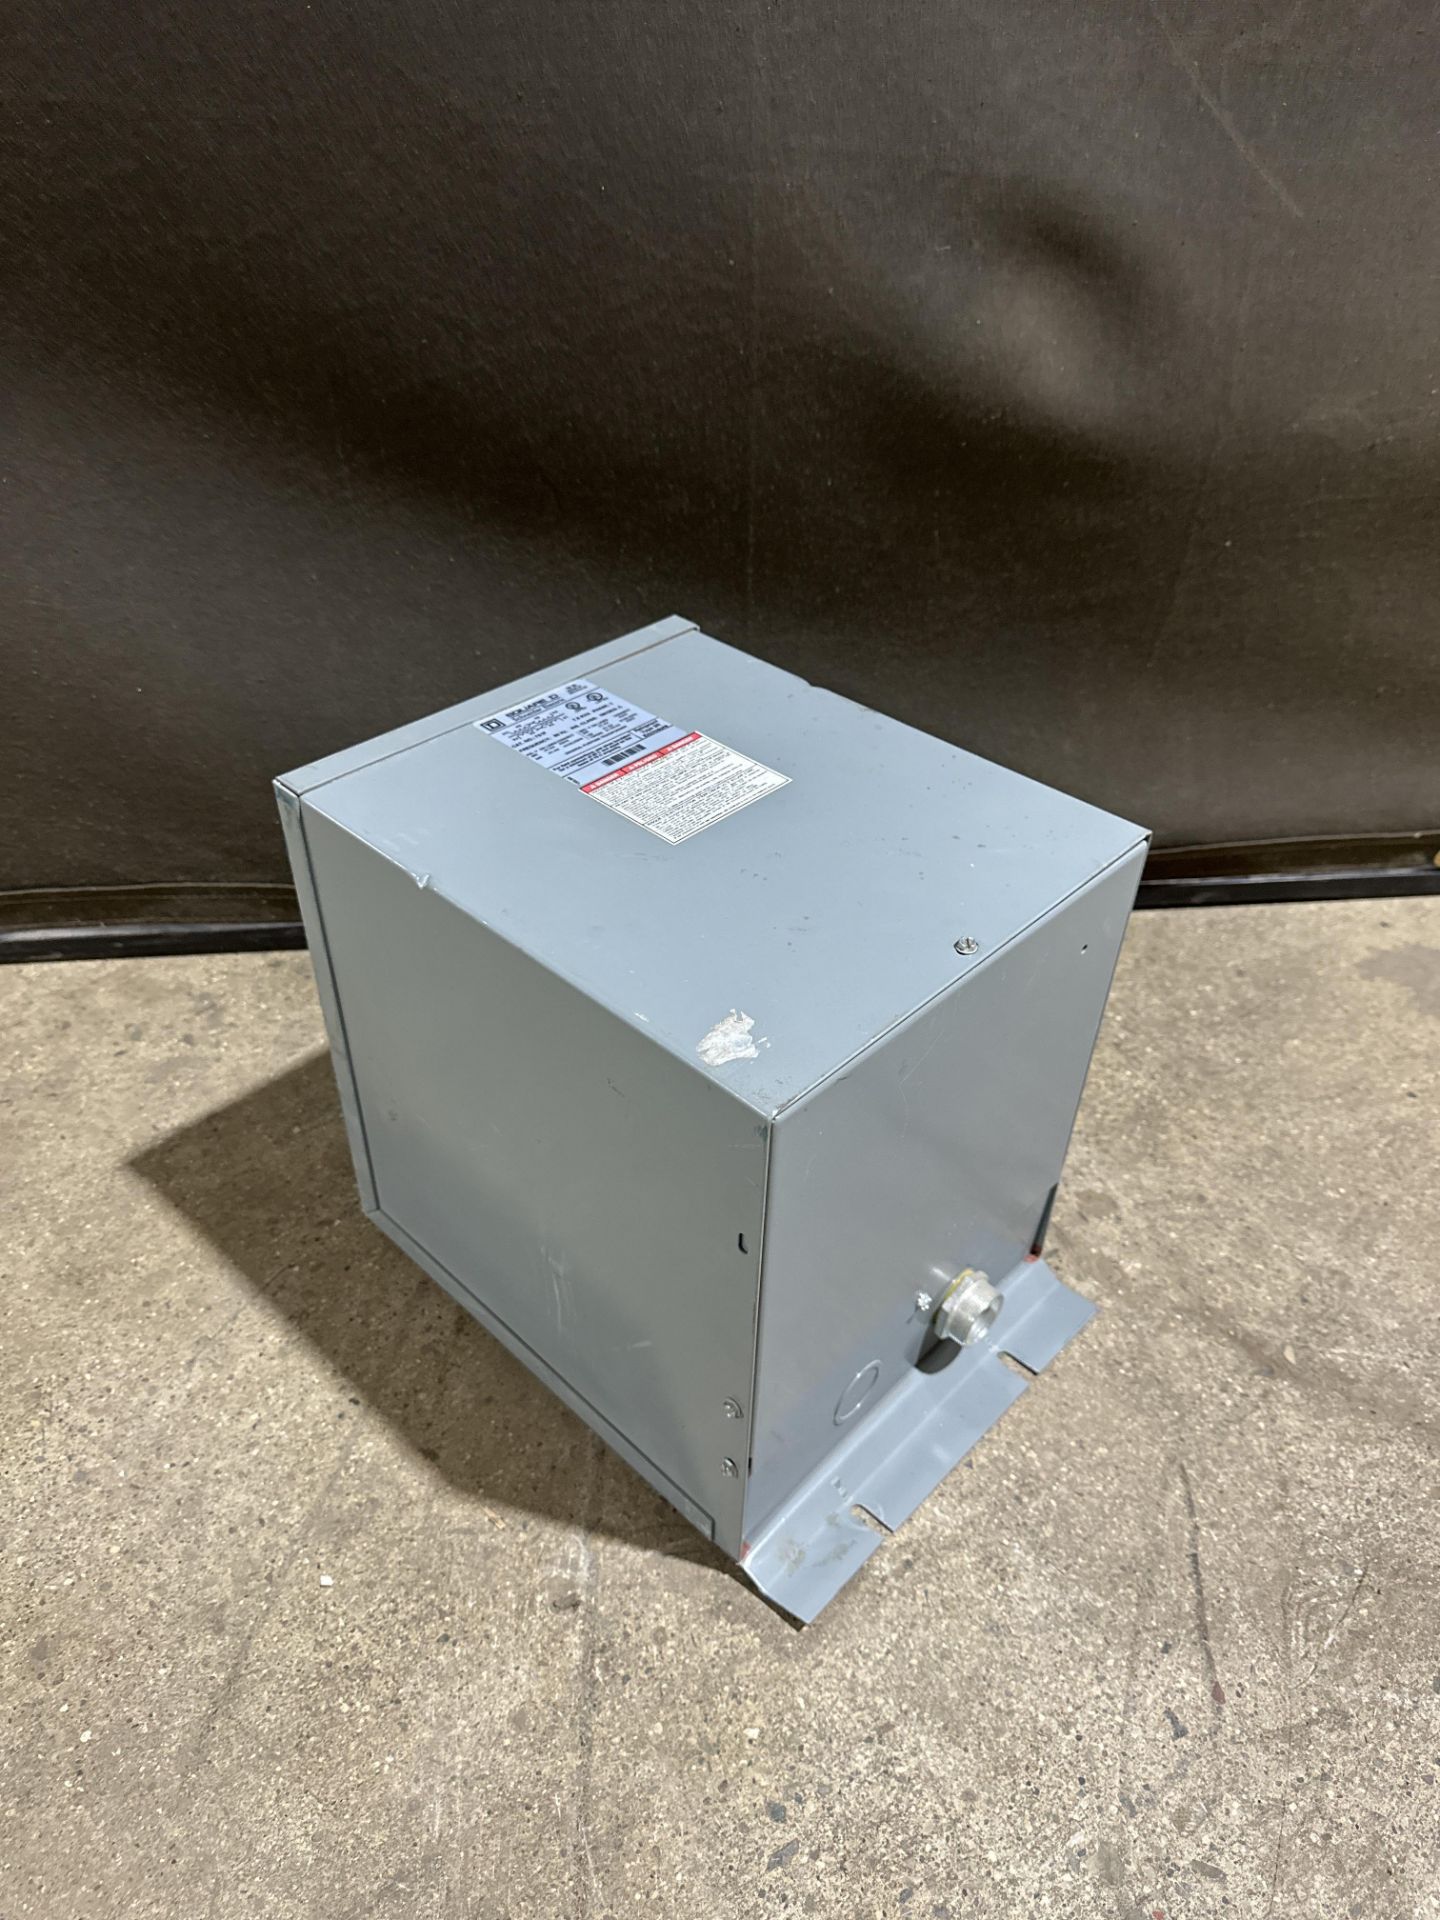 SQUARE D 7S1F TRANSFORMER 240/480 PRIMARY 120/240 SECONDARY 7.5 KVA - Image 4 of 4